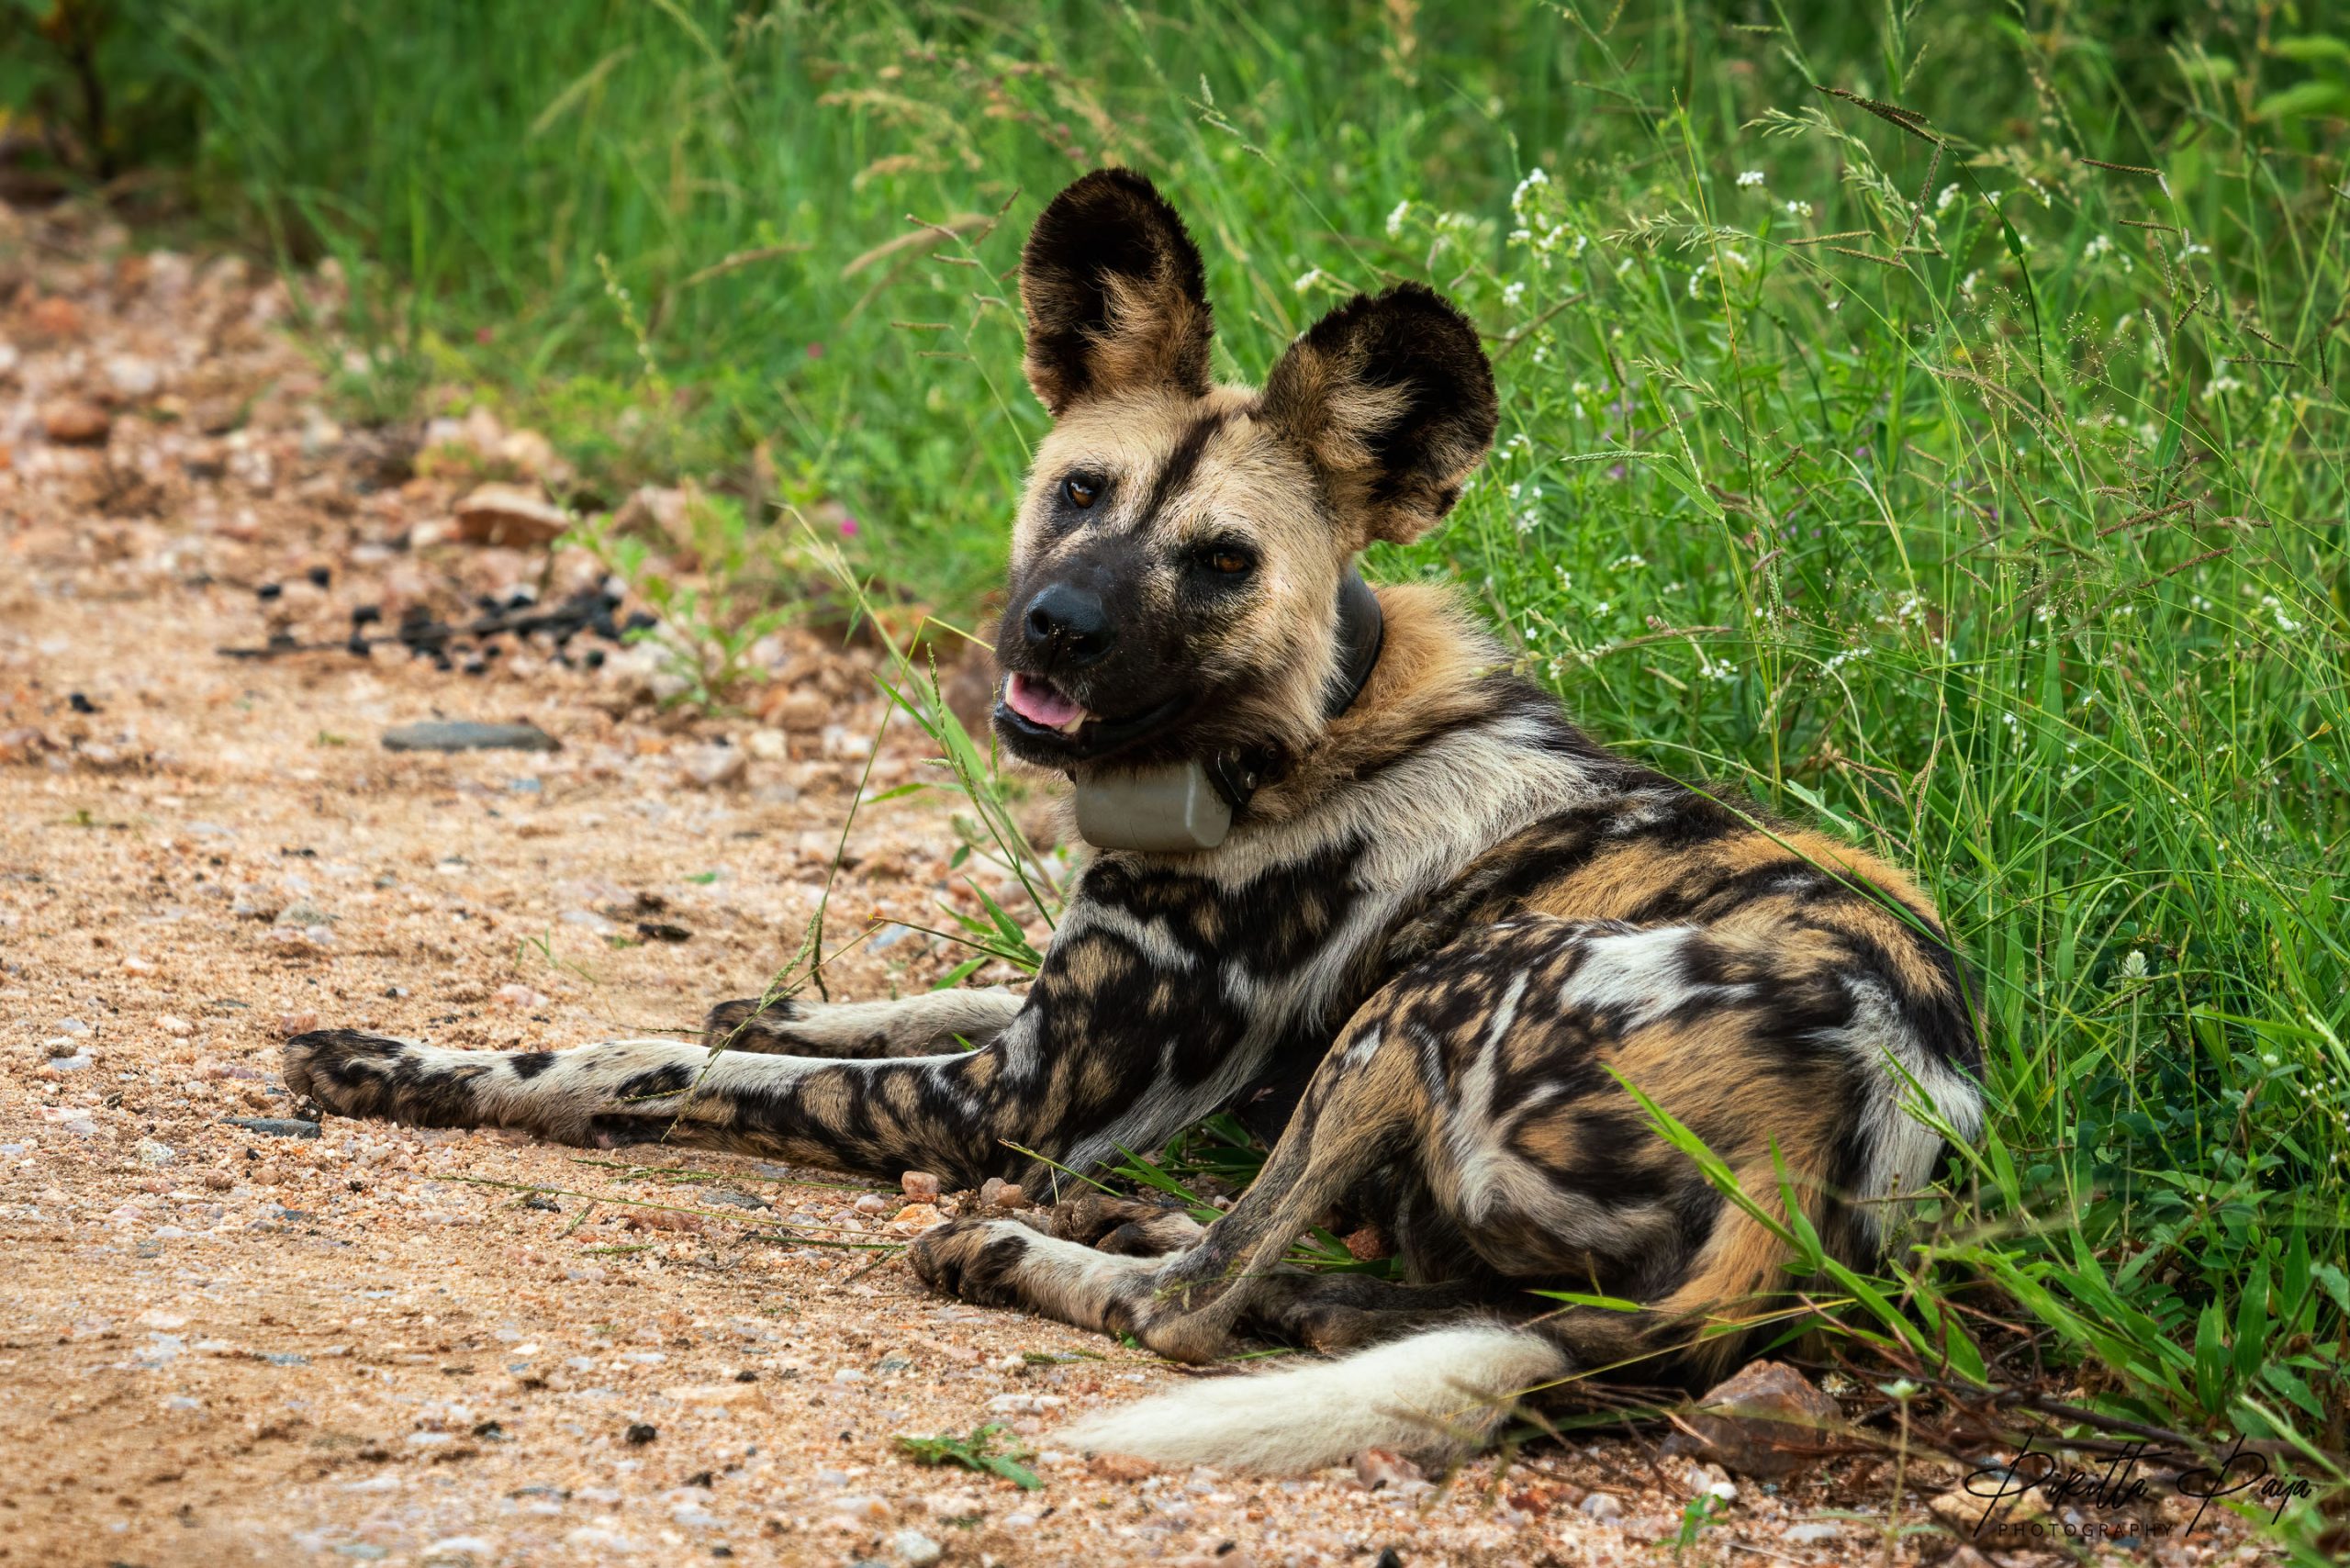 An African wild dog or a painted dog was lying on the side of the road with her pack in close proximity. She had a tracking collar for research purposes. Kruger National Park, South Africa.